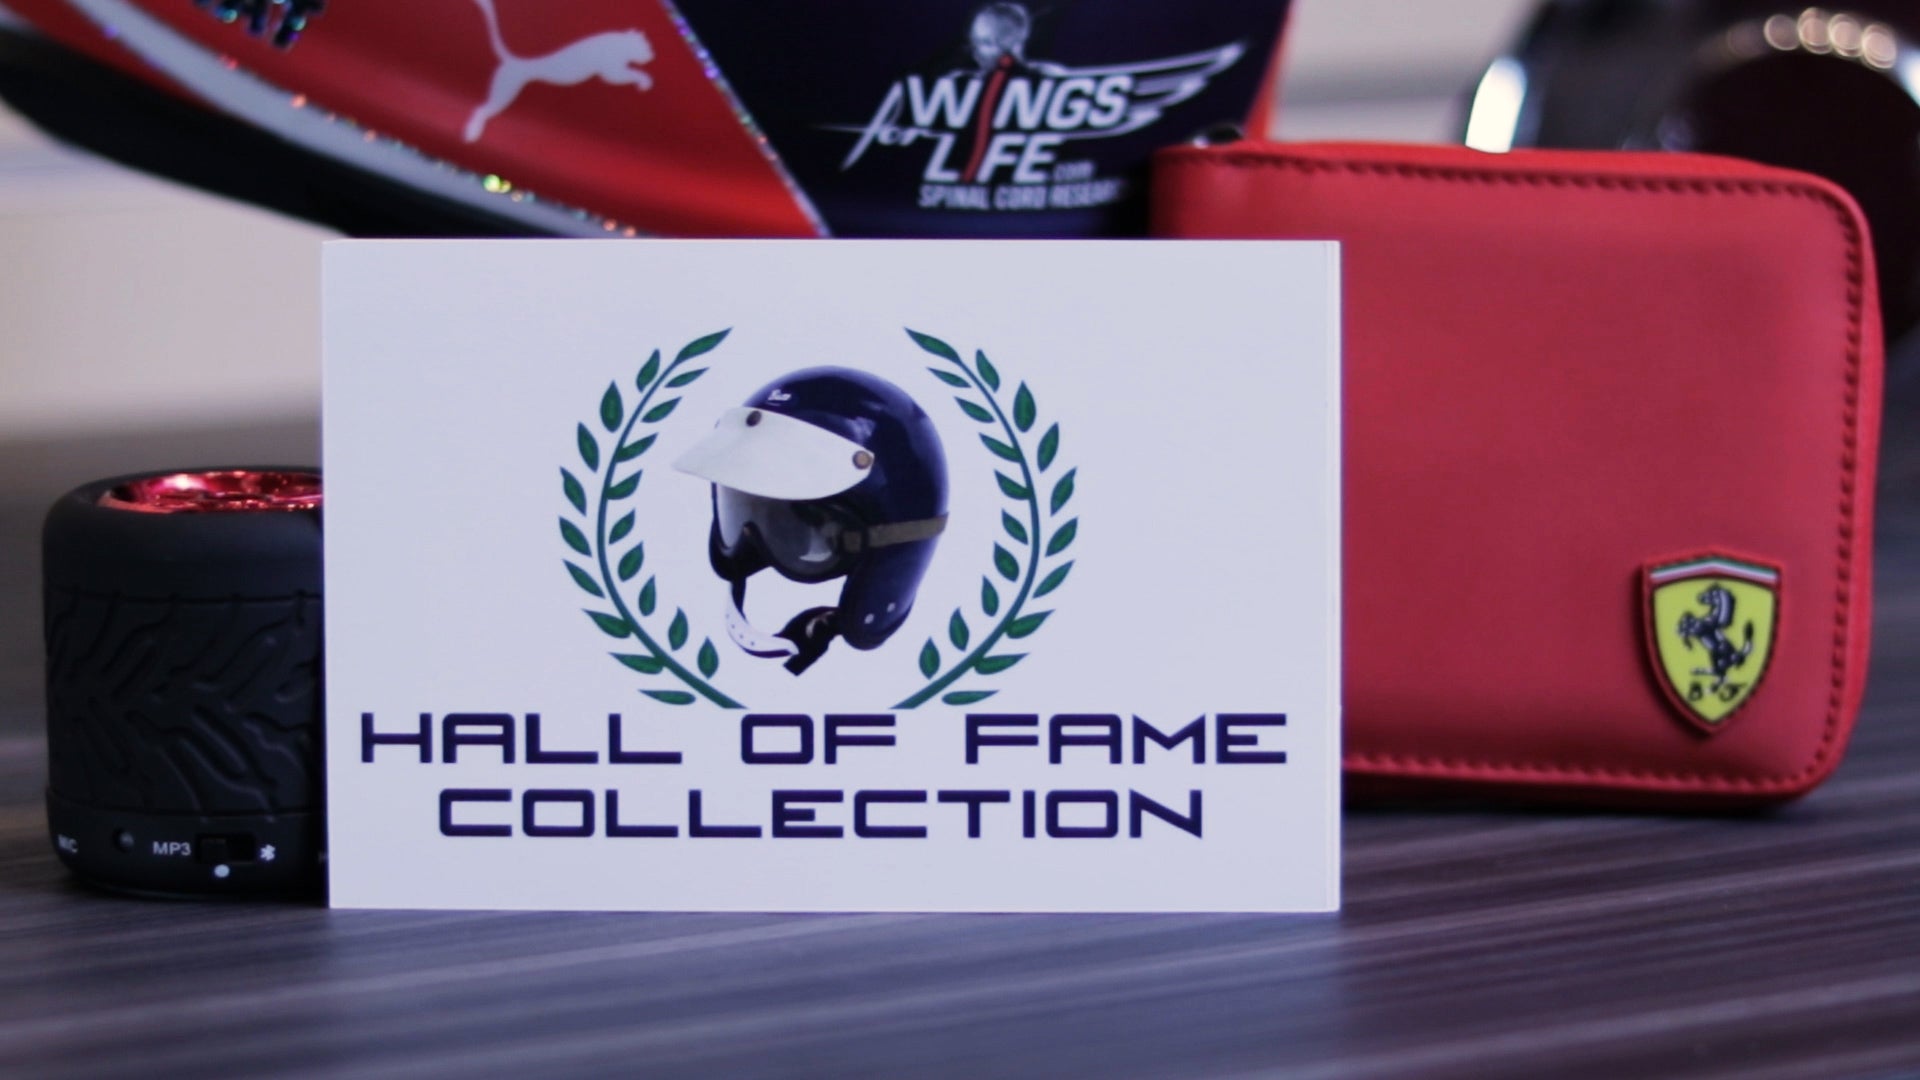 A Small Showcase of Our Formula 1 Collection